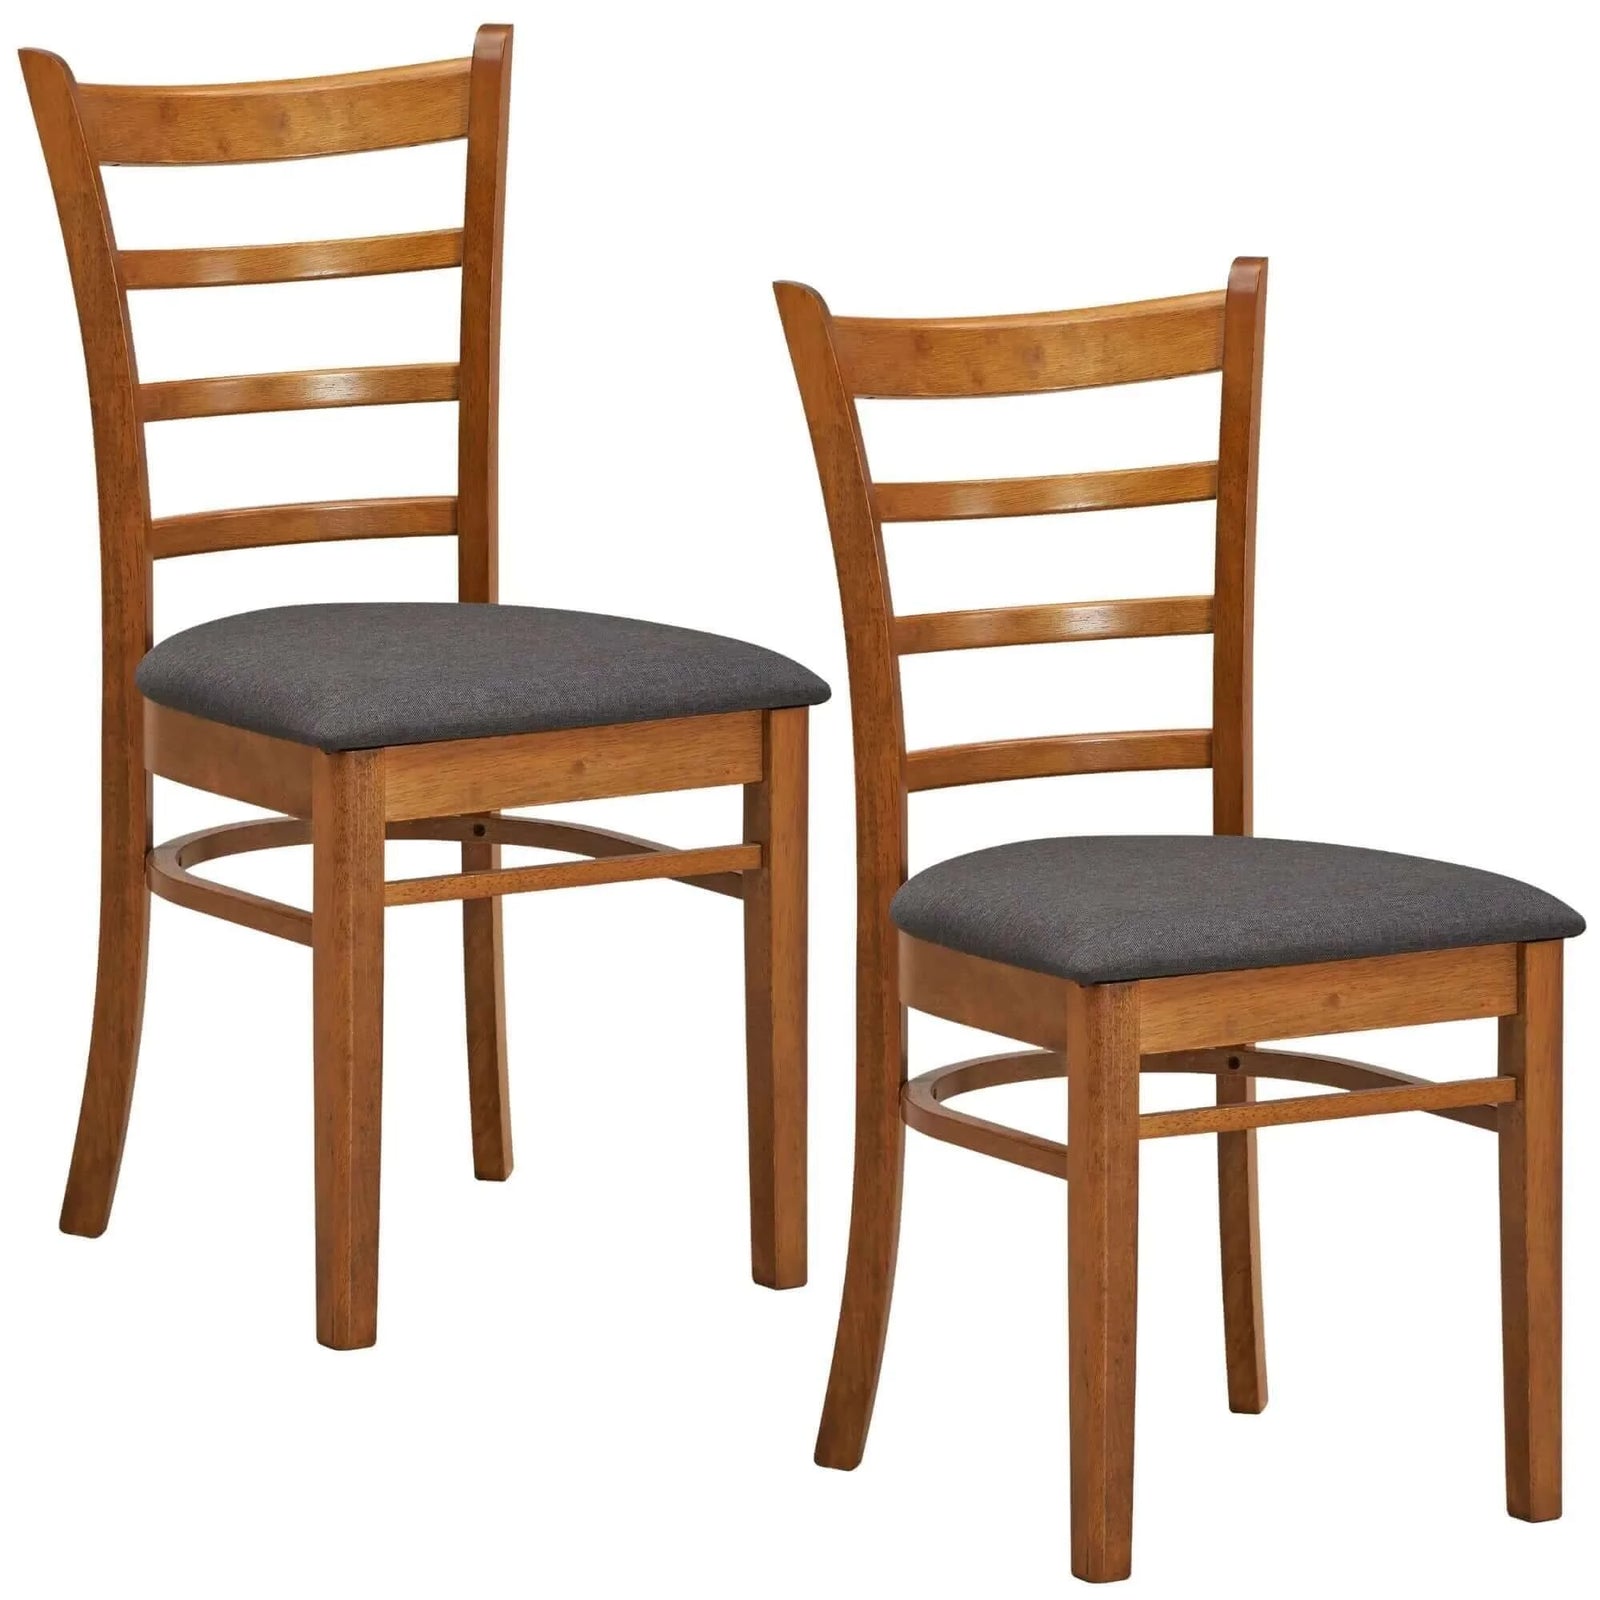 Buy linaria dining chair set of 2 crossback solid rubber wood fabric seat - walnut - upinteriors-Upinteriors